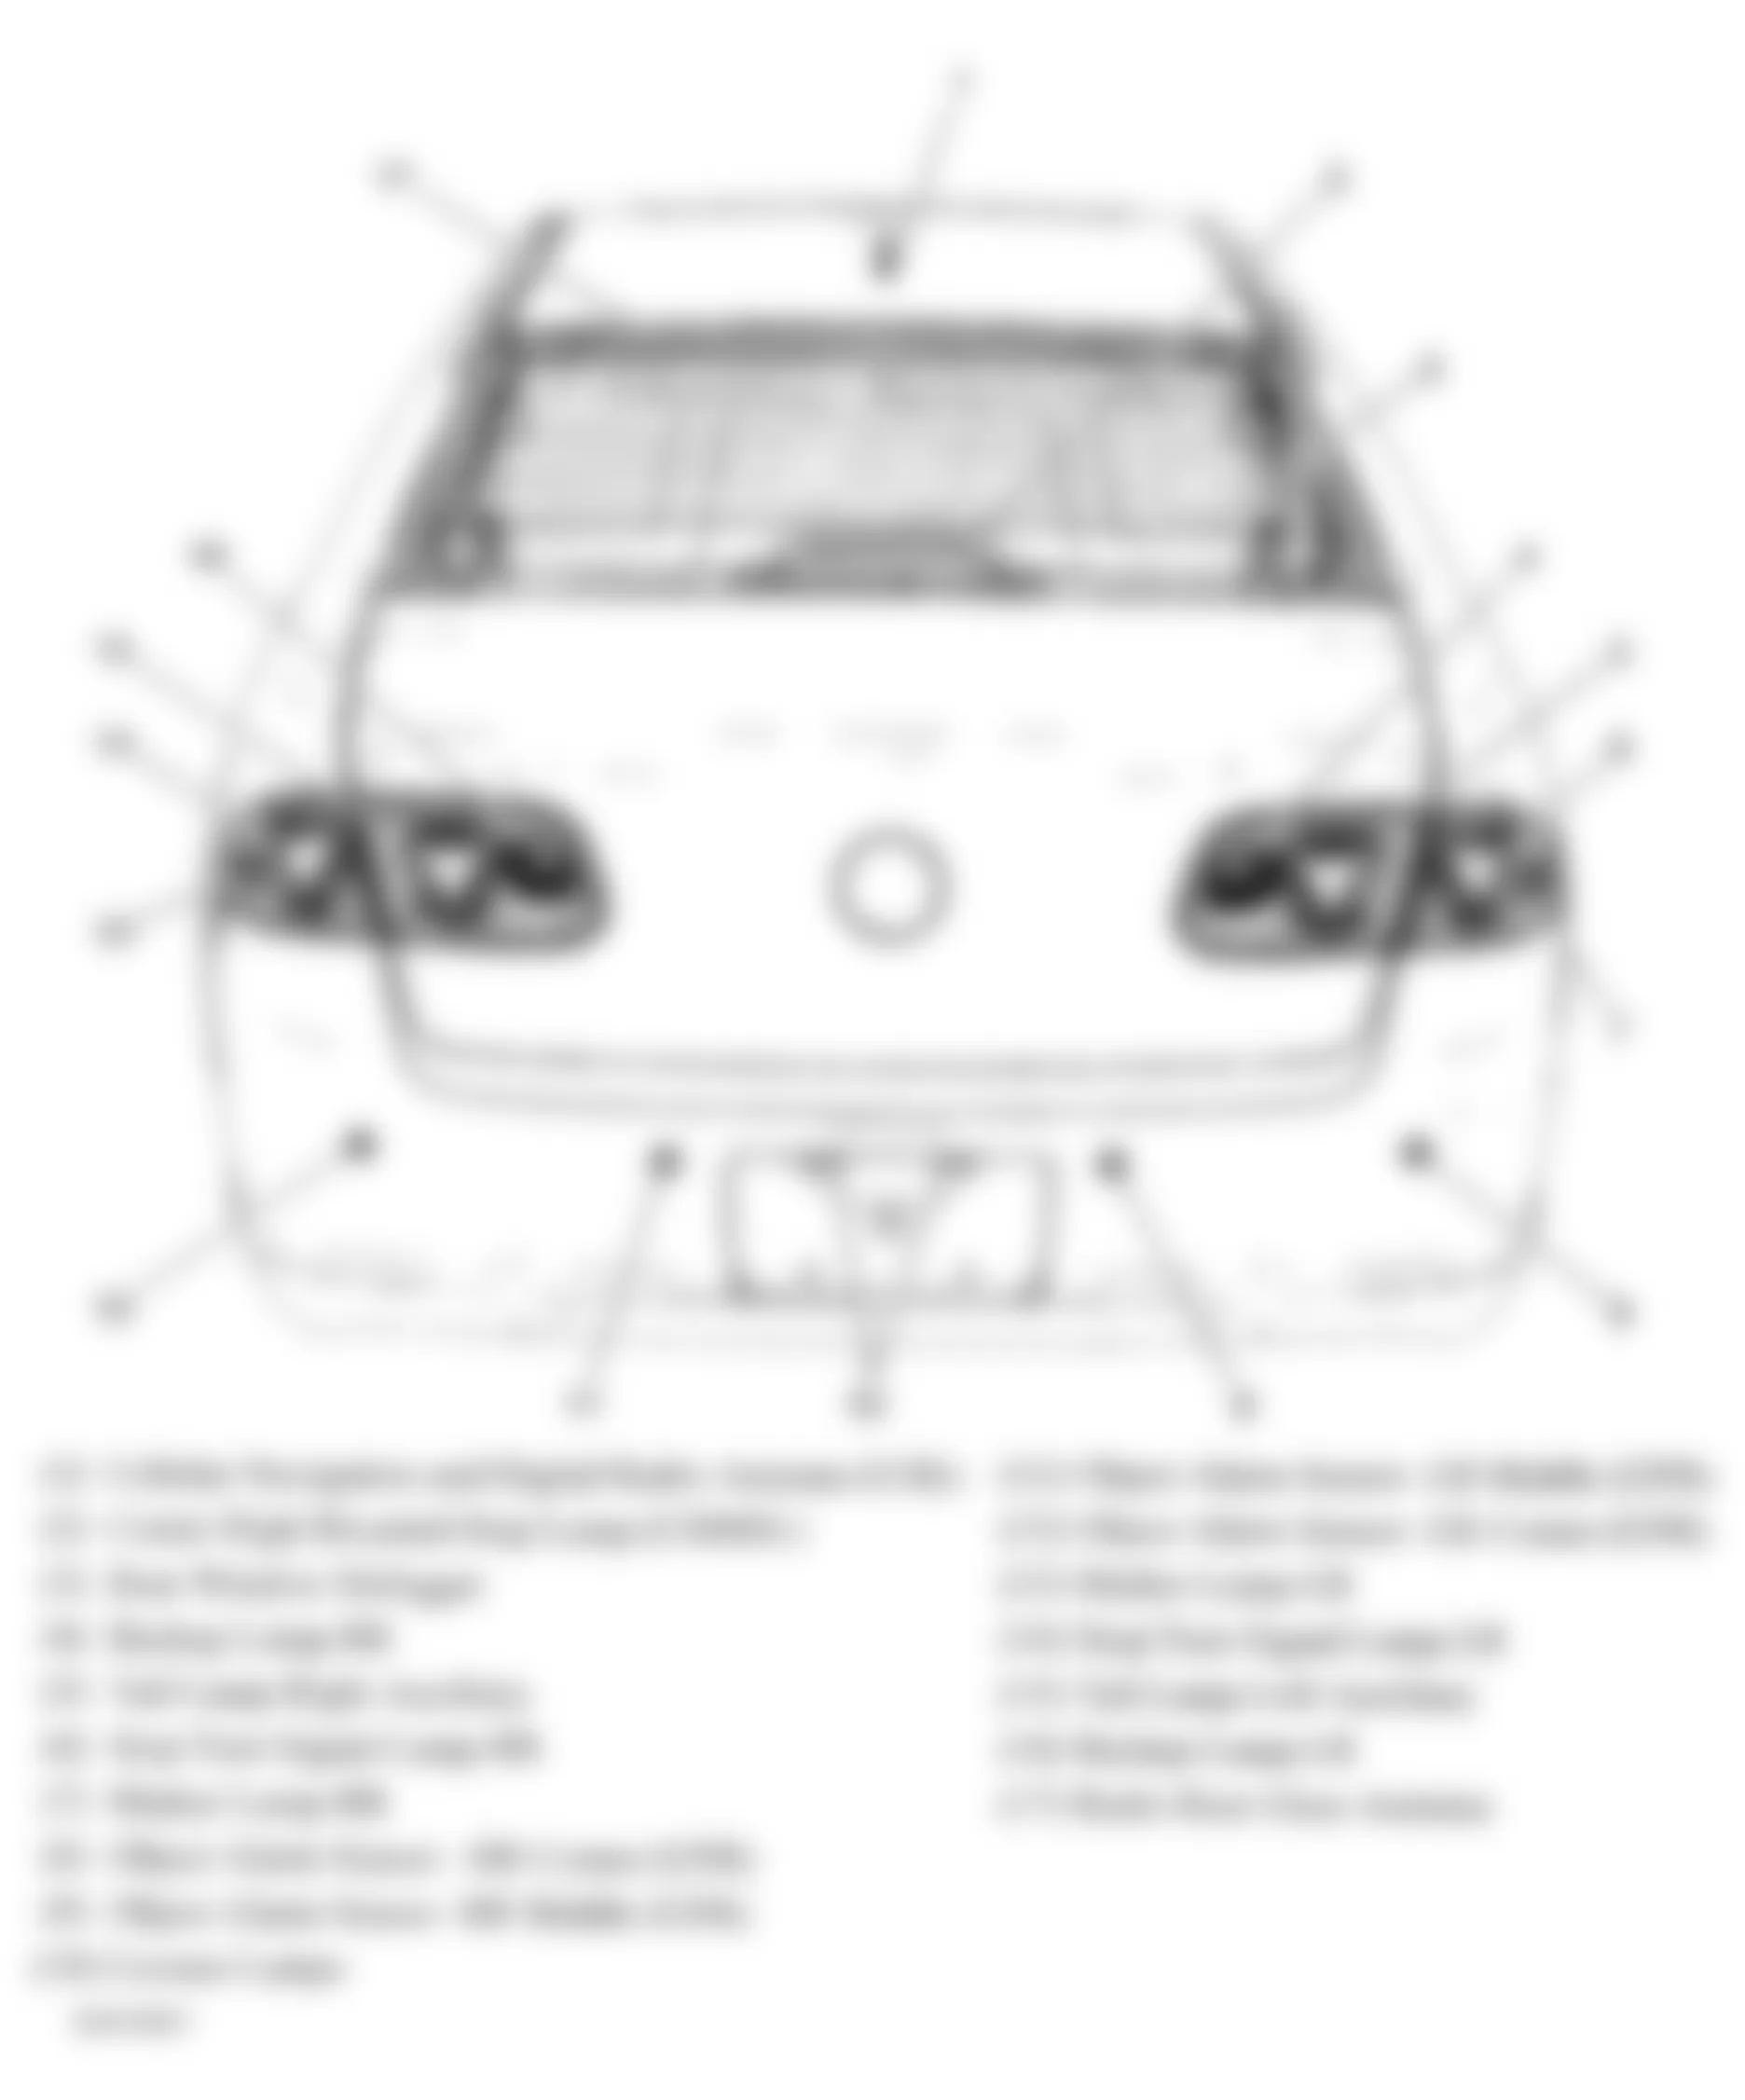 Buick Lucerne CXL 2008 - Component Locations -  Rear Of Vehicle